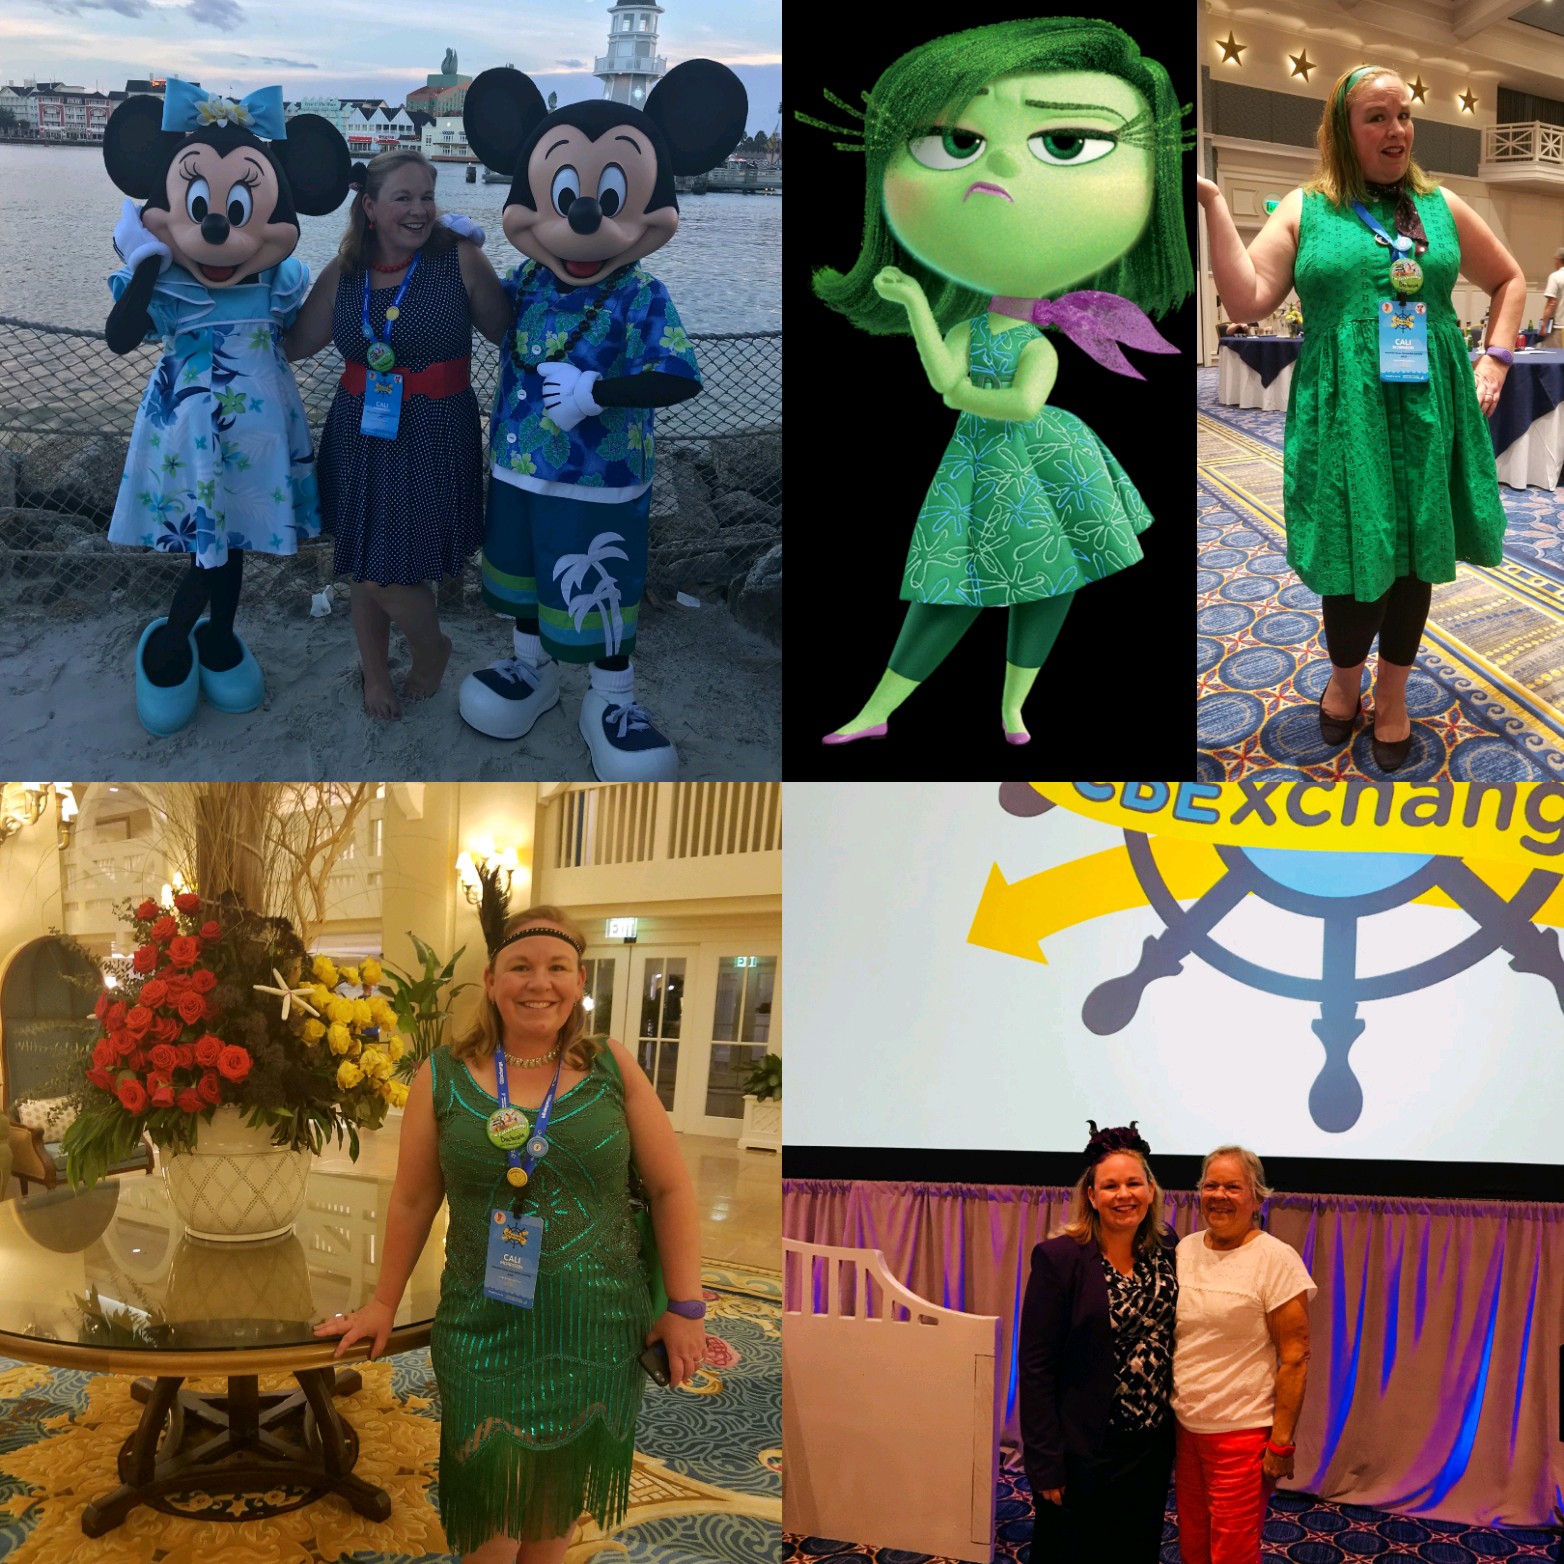 Four pohtos of Cali dressed up as disney characters in a collage. 1. With Minnie and Mickey in a minnie inspired, polka dot outfit, 2. with a disney character in all green, Tiana from Princess and the Frog, and posing with her mother in front of a large conference room.